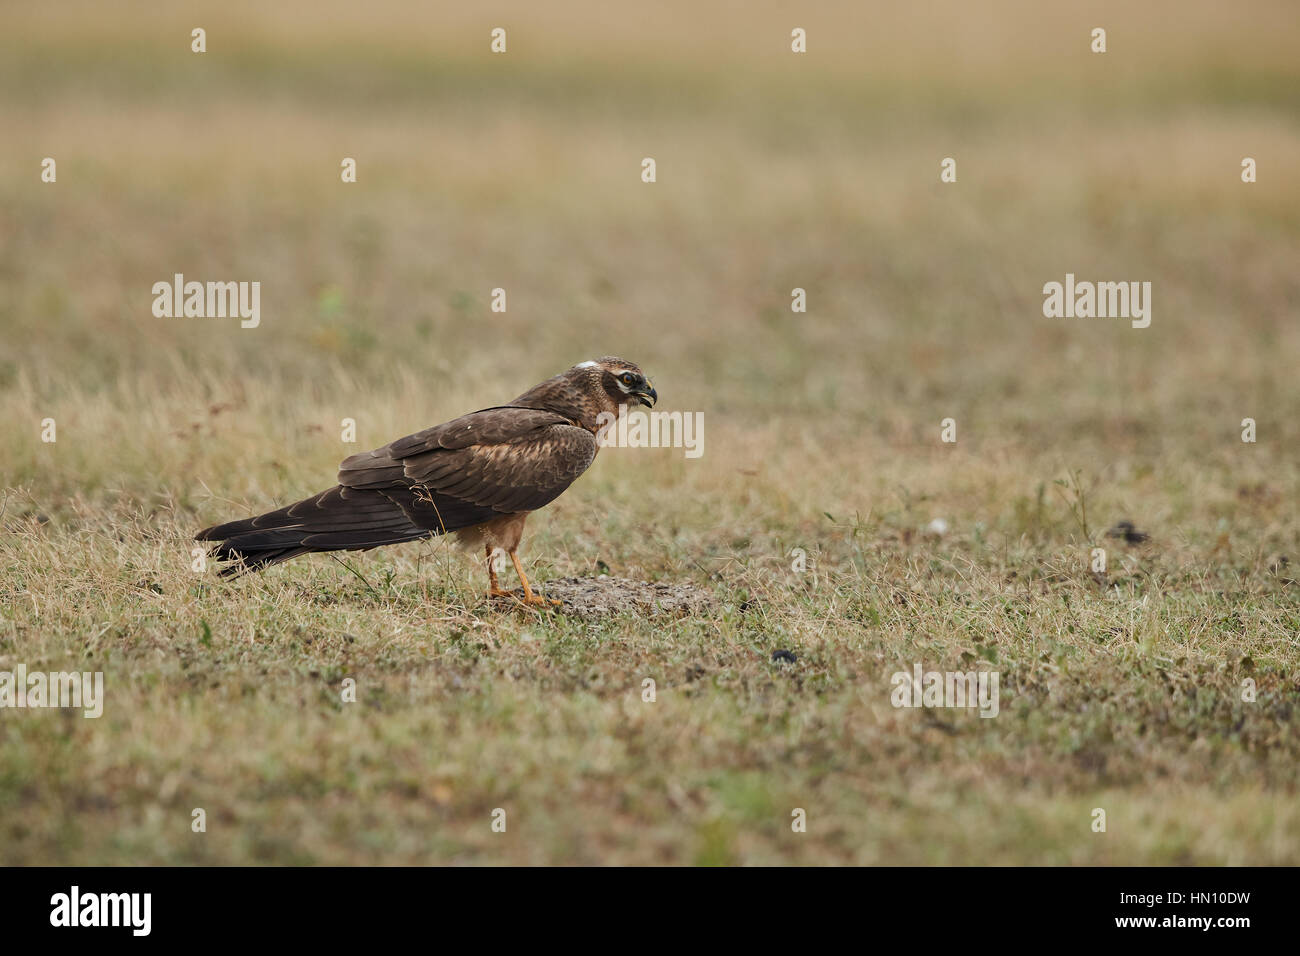 The Montagu's harrier (Circus pygargus) resting on the grassy habitat listening to the sounds of nature and having satisfactory midday meal Stock Photo